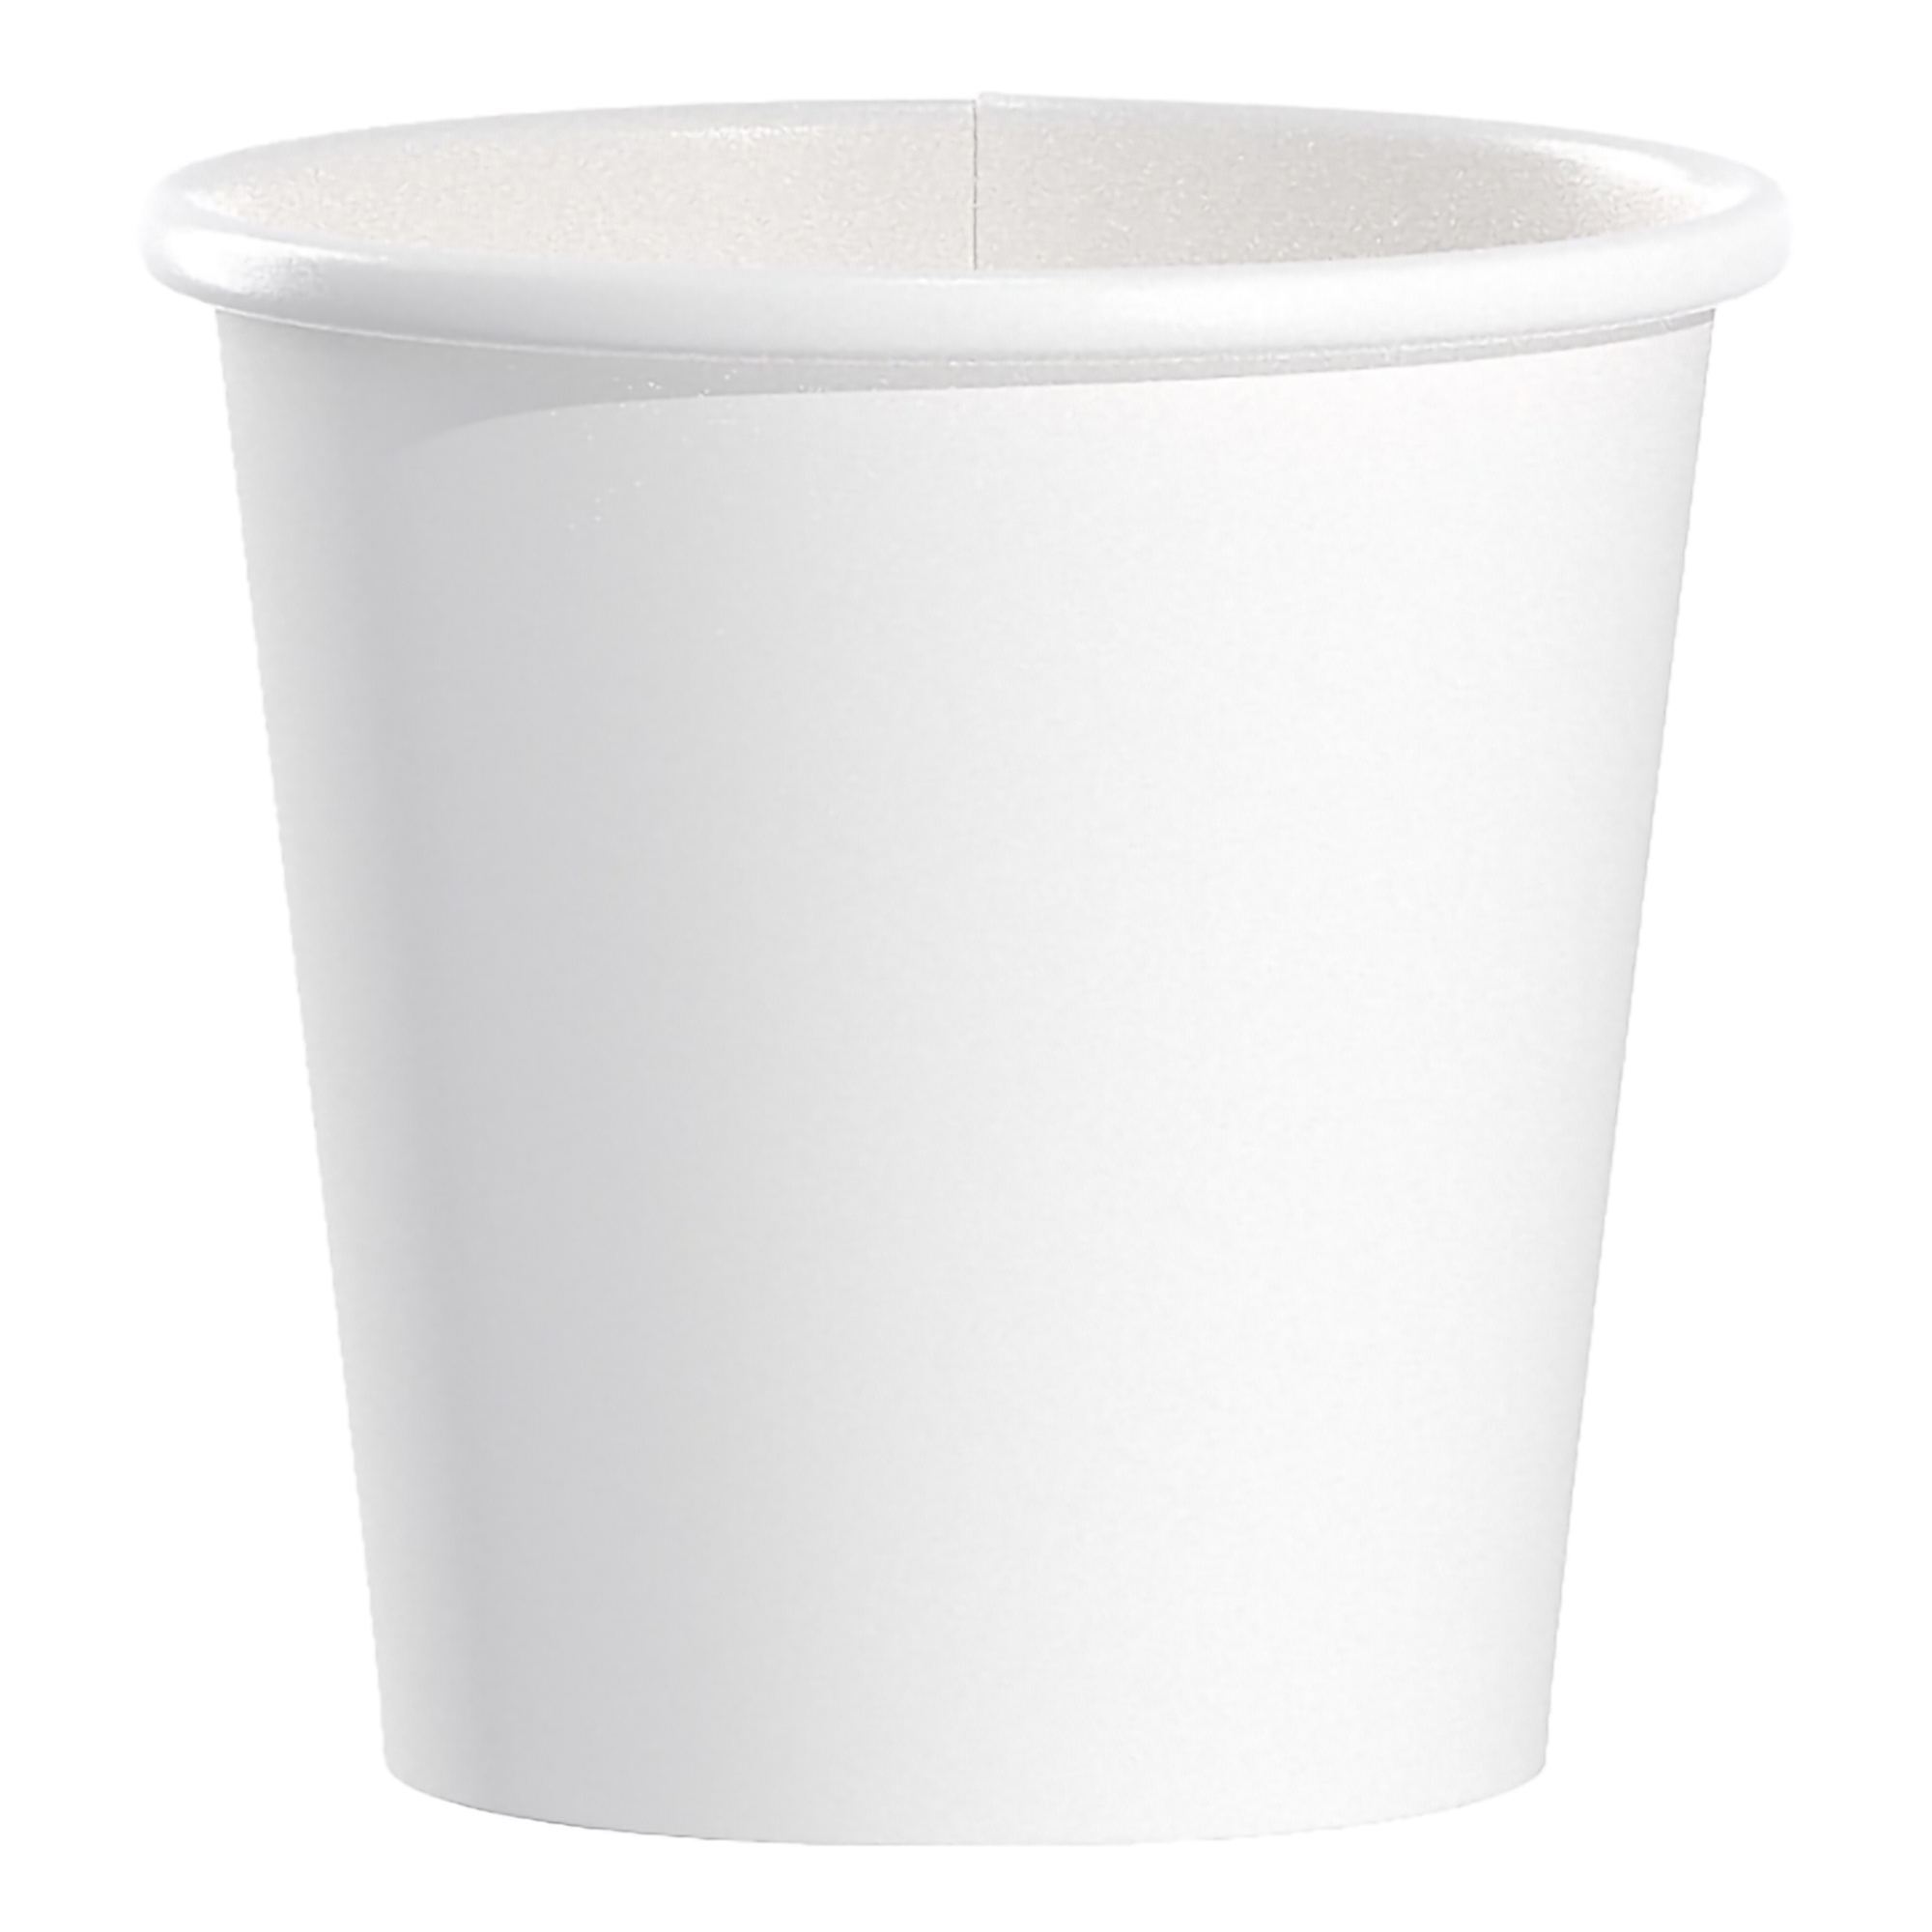 Solo Polycoated Hot Paper Cups 4 oz White